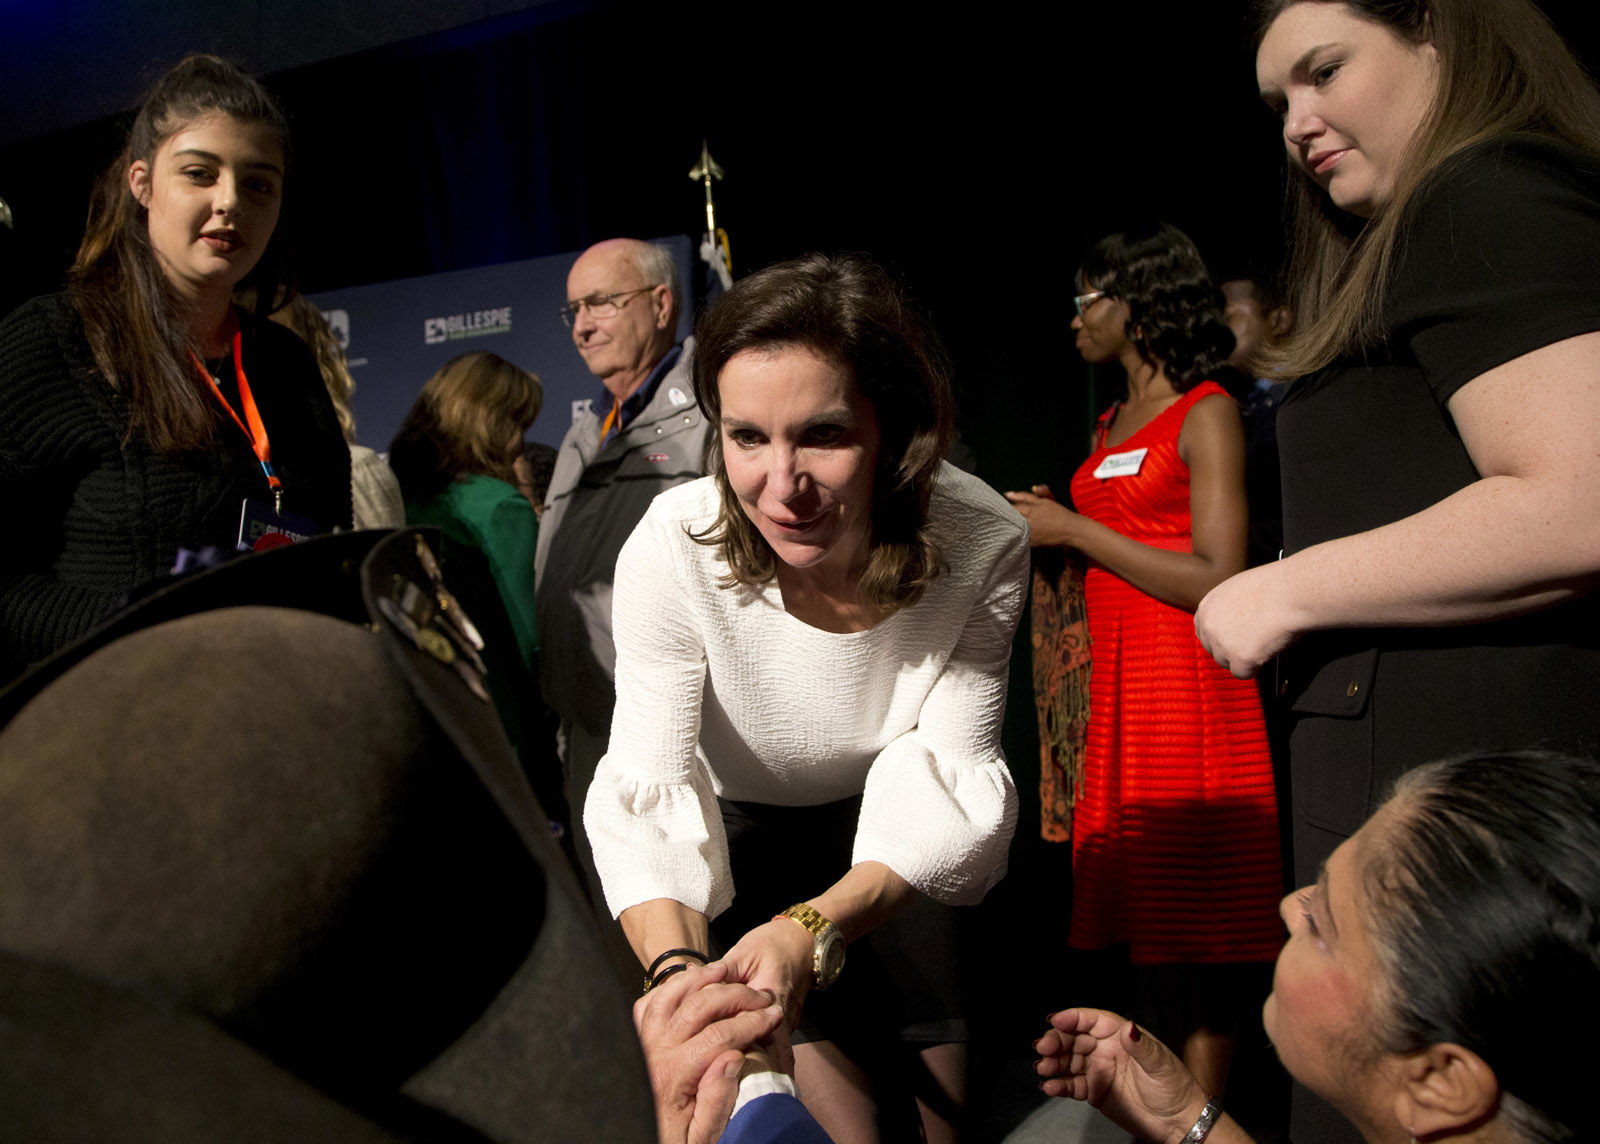 Republican candidate for Lt. Gov. State Sen. Jill Vogel, center, greets supporters after a concession speech during an election party in Richmond, Va., Tuesday, Nov. 7, 2017. Vogel lost to Democrat Justin Fairfax. (AP Photo/Steve Helber)